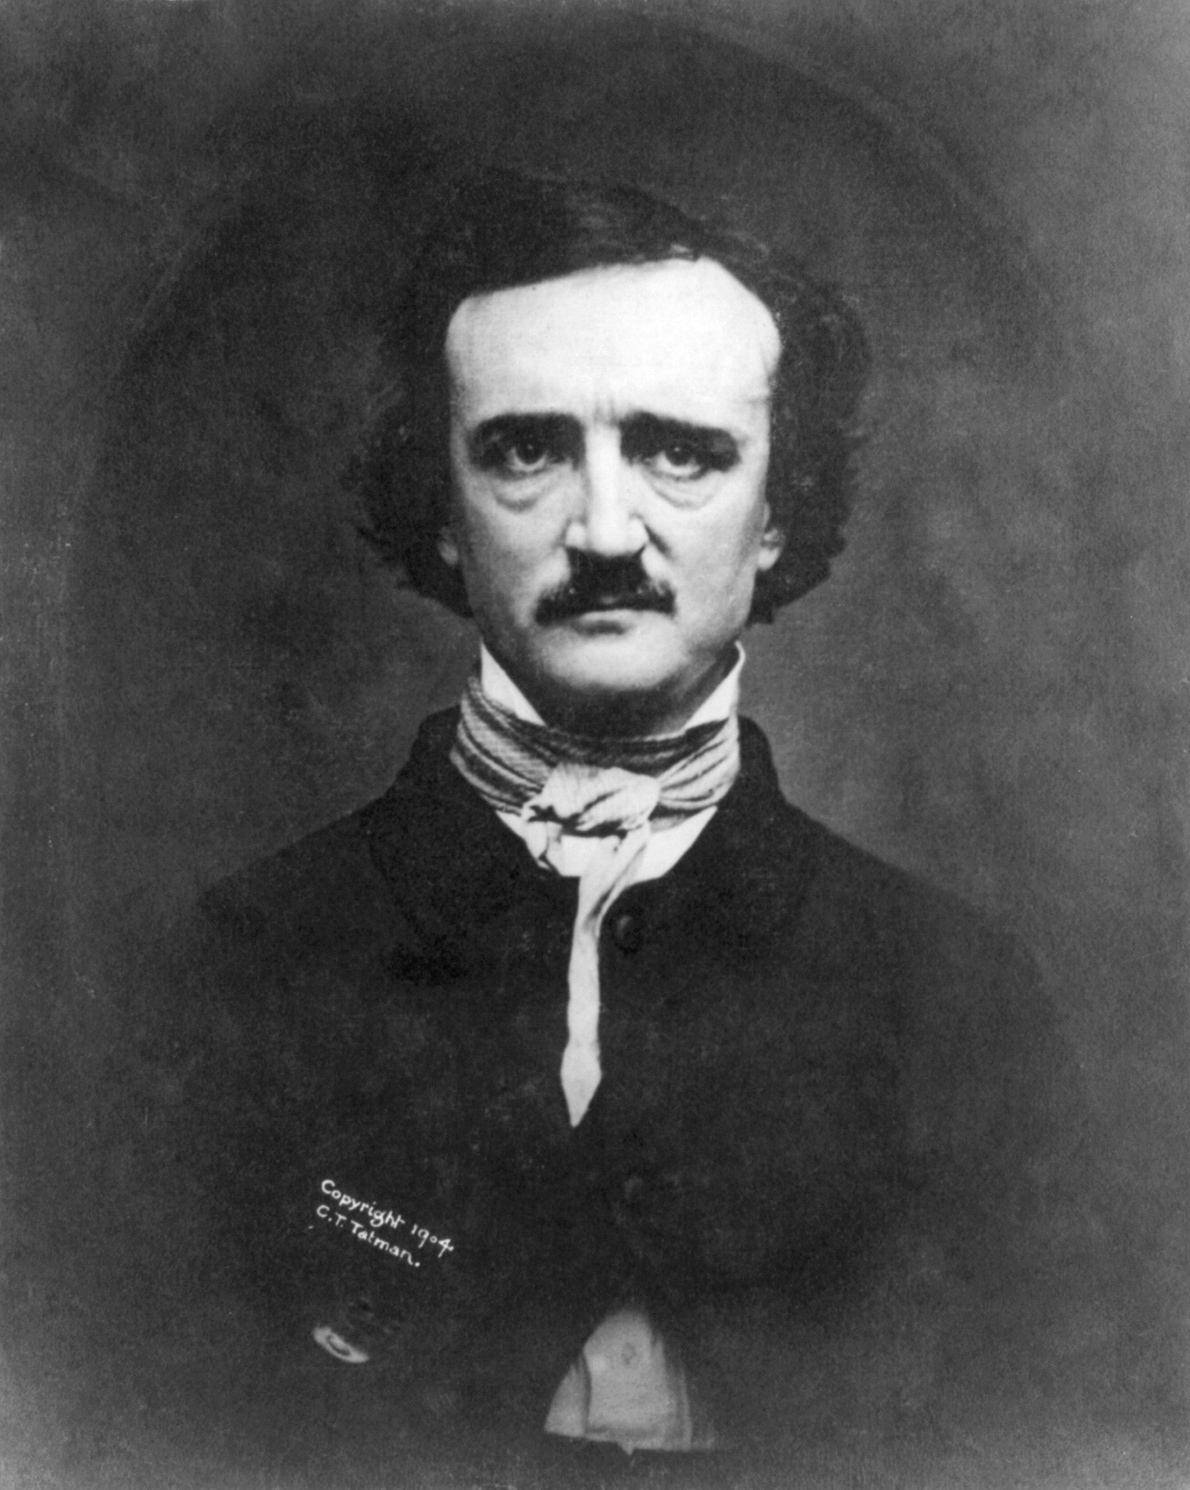 what impact did edgar allan poe have on american literature